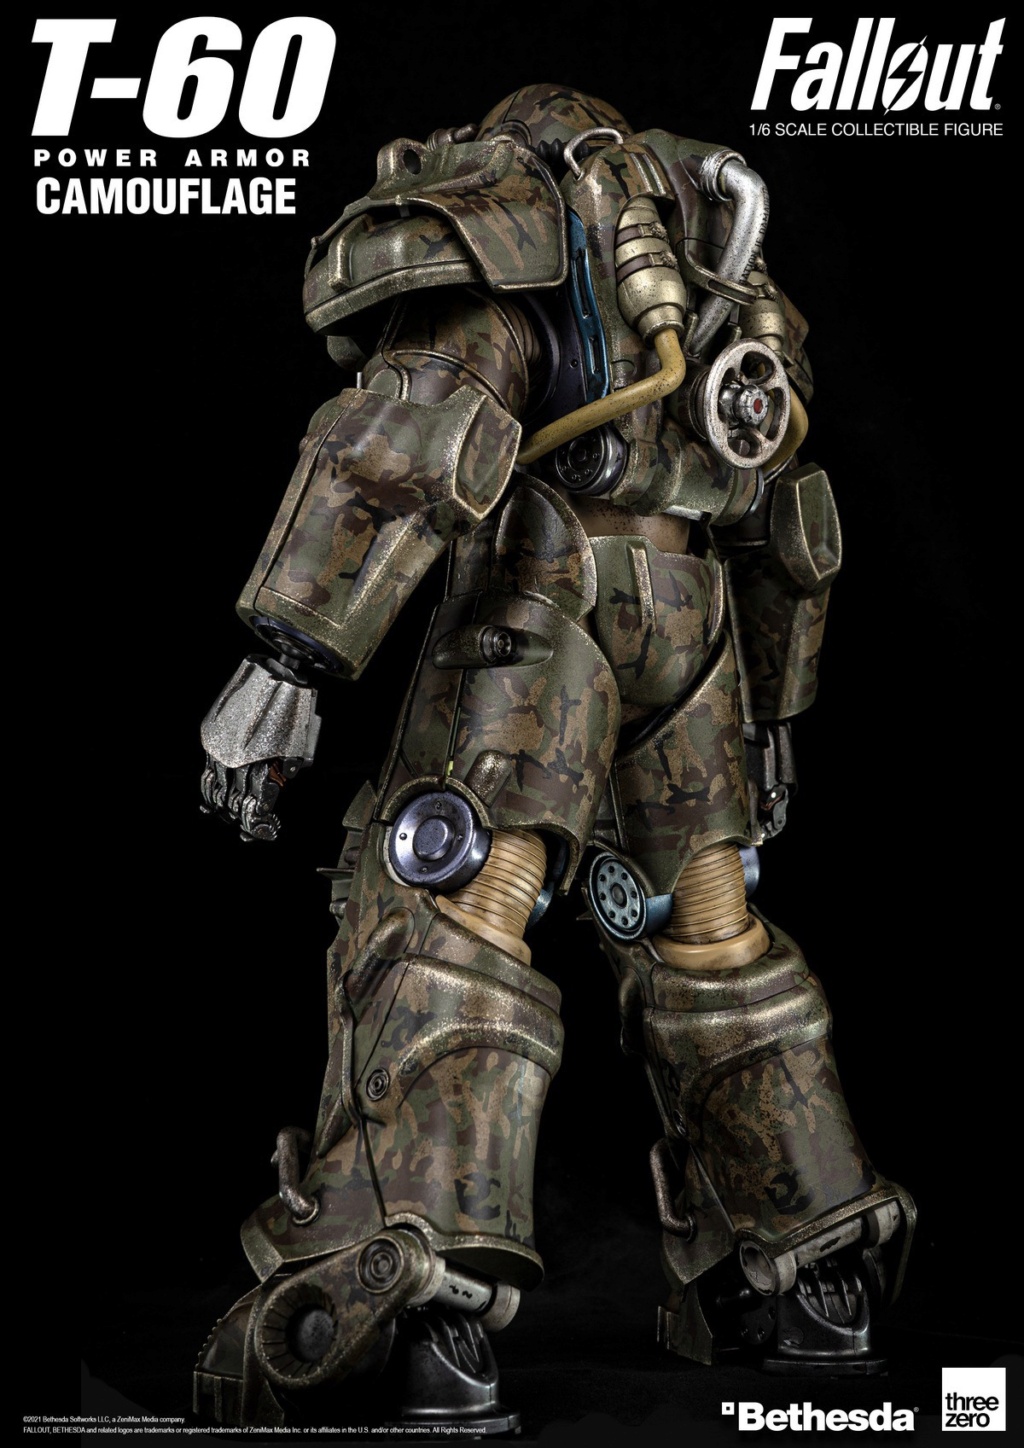 NEW PRODUCT: Threezero: 1/6 Fallout: Remaining Dust/Radiation Series-T-60 Power Armor Action Figure 0fb81f10